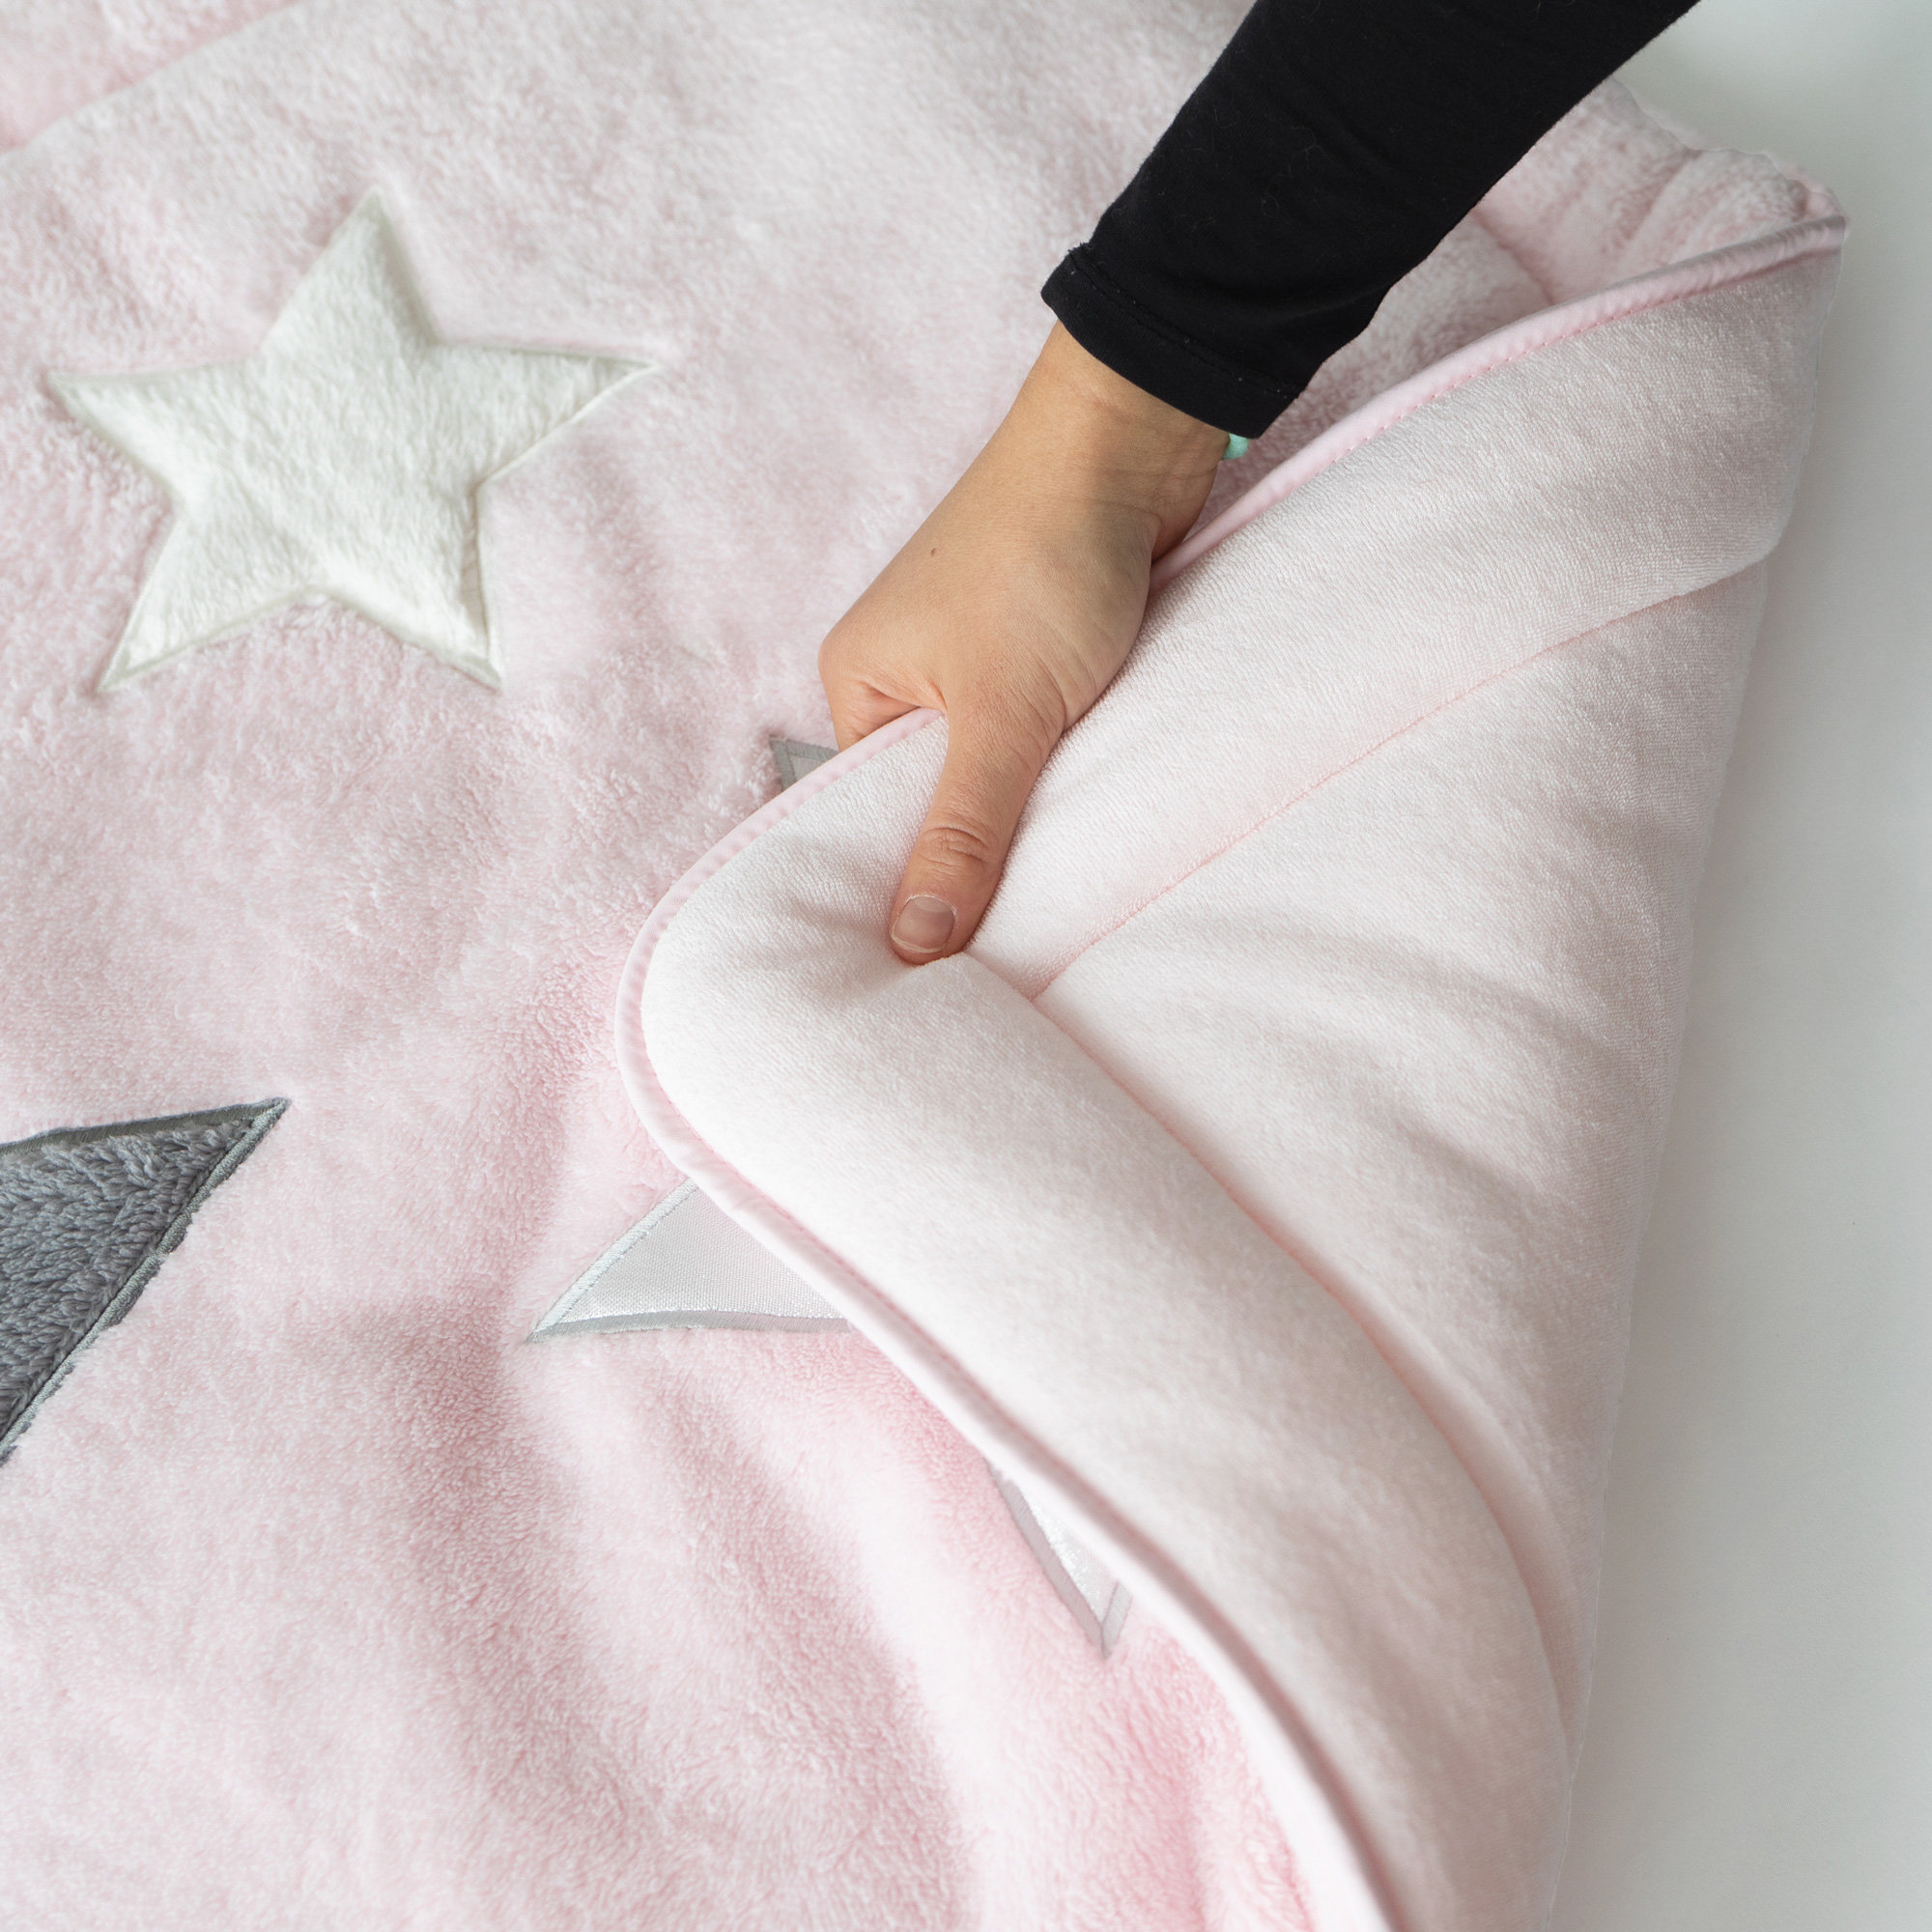 Padded play mat Pady softy + terry 75x95cm STARY Little stars print cristalOutlet